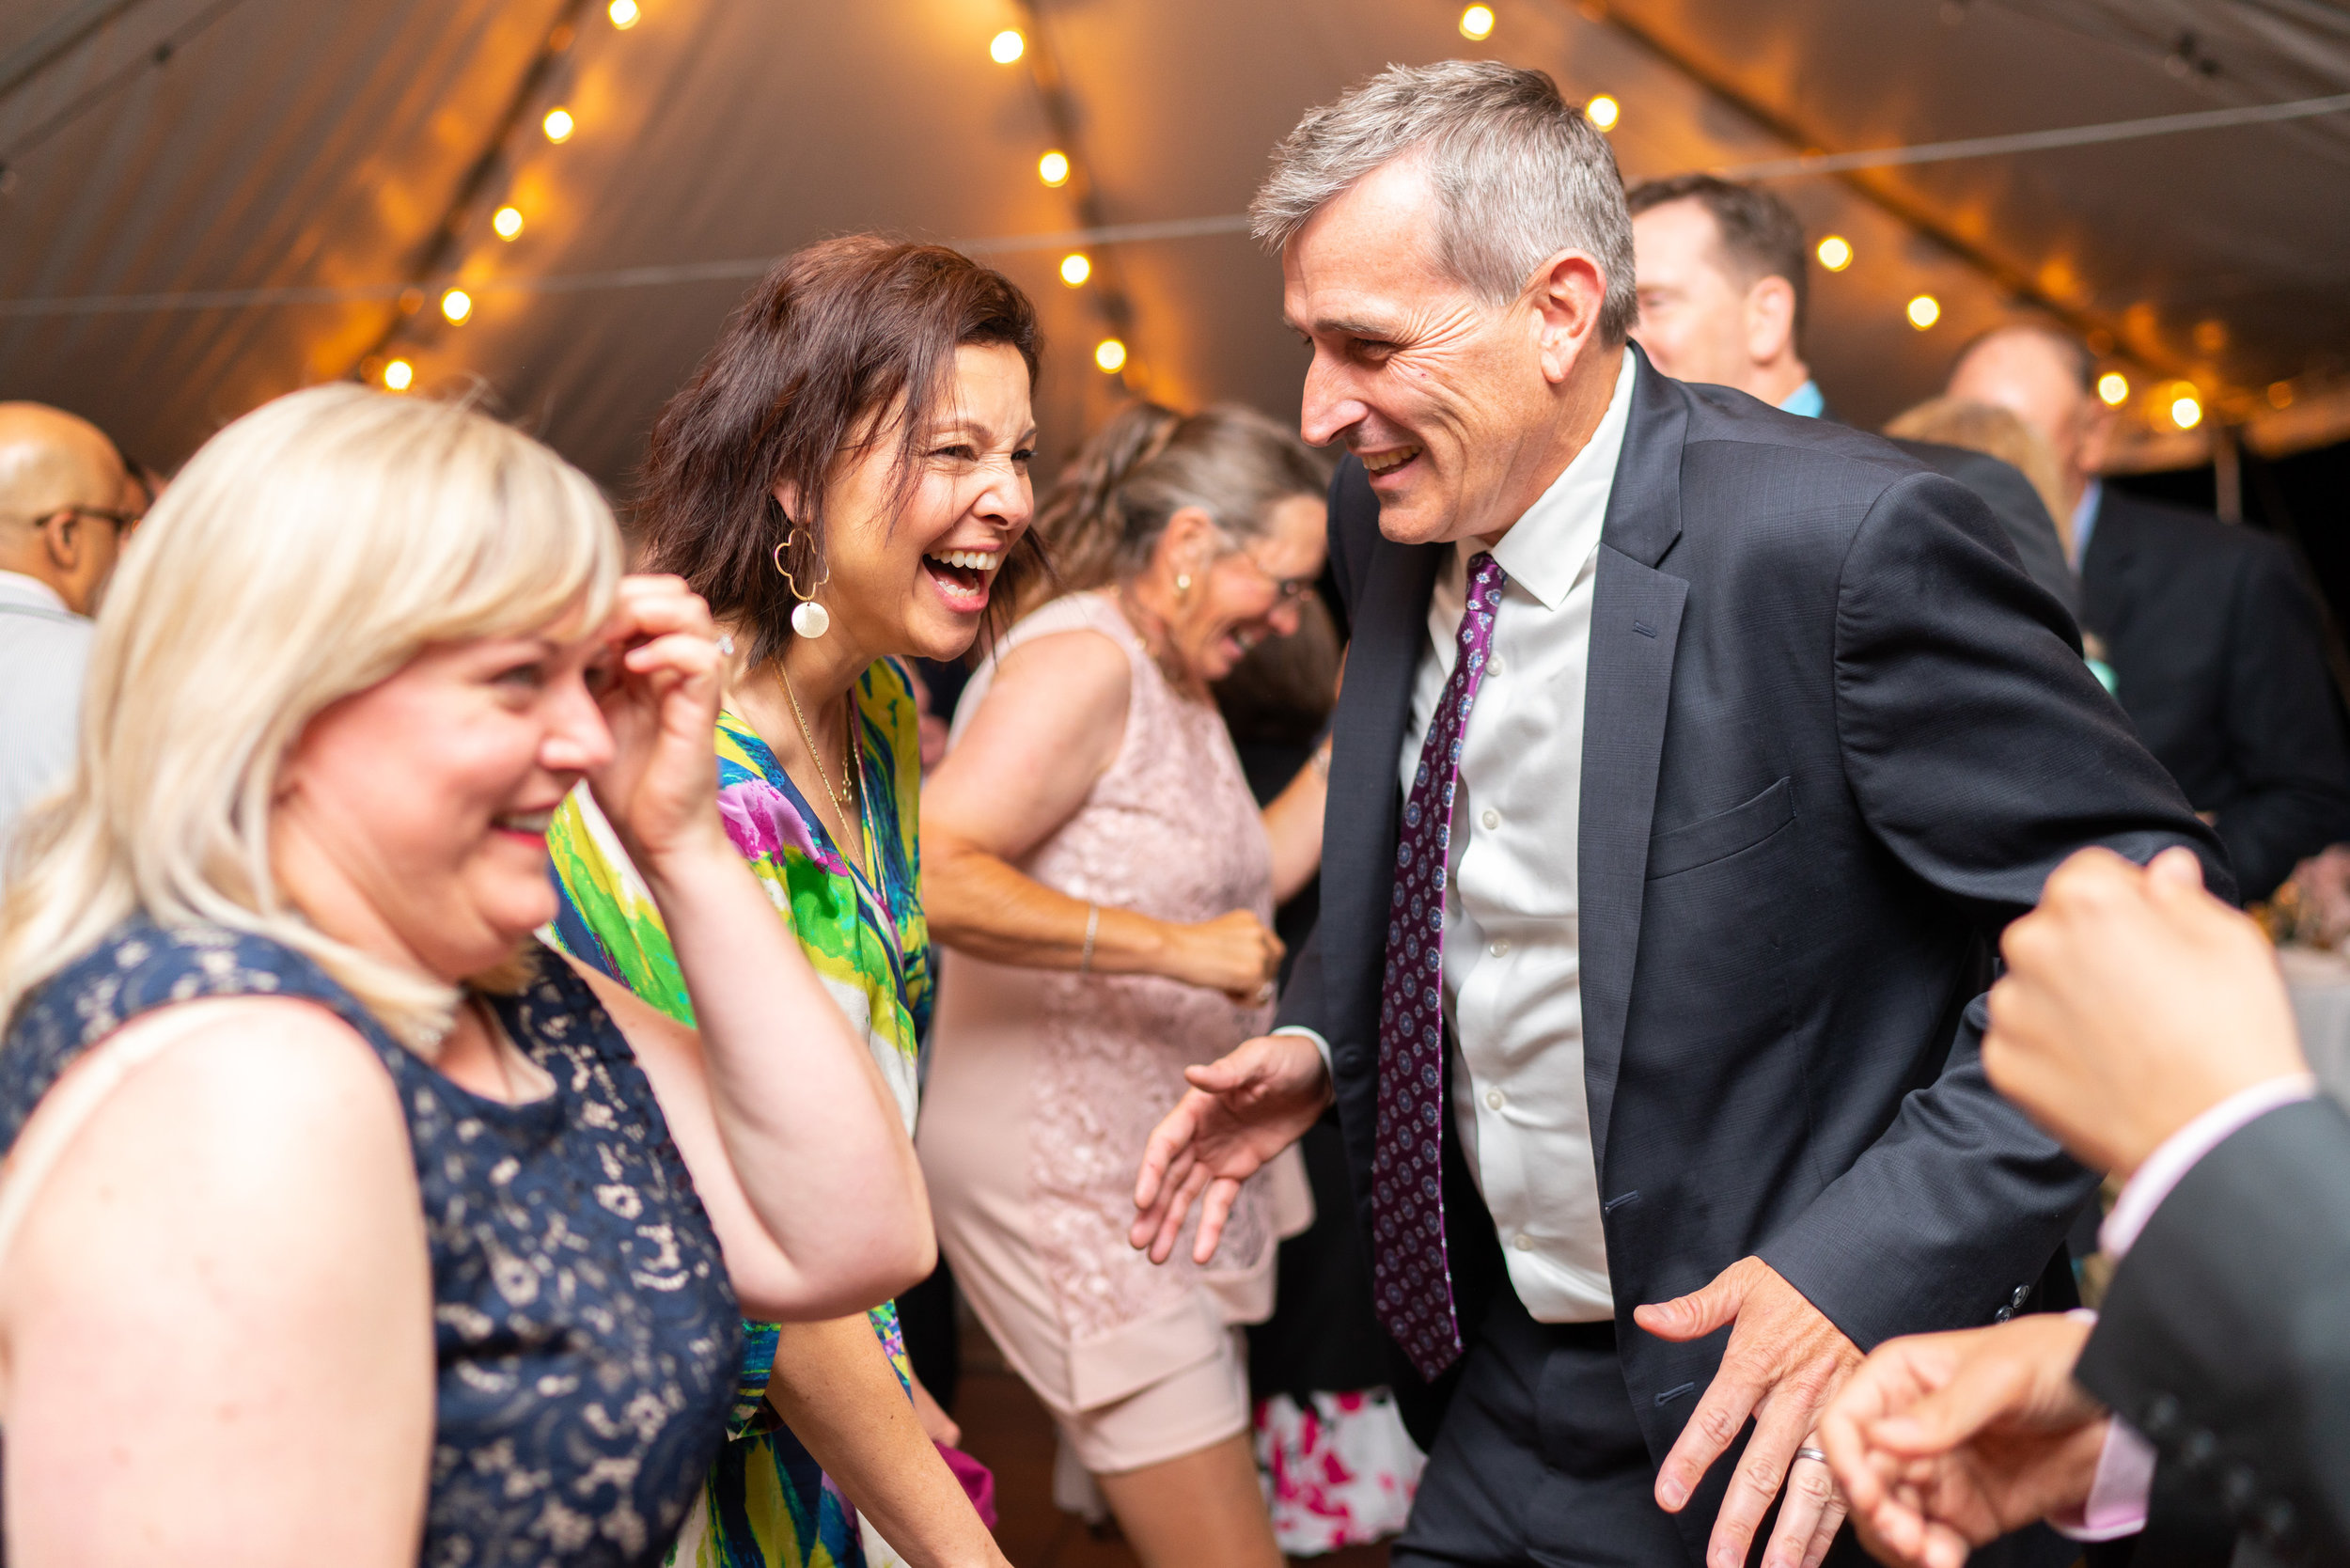 Guests laughing and dancing at Hendry House tented wedding reception with twinkle lights